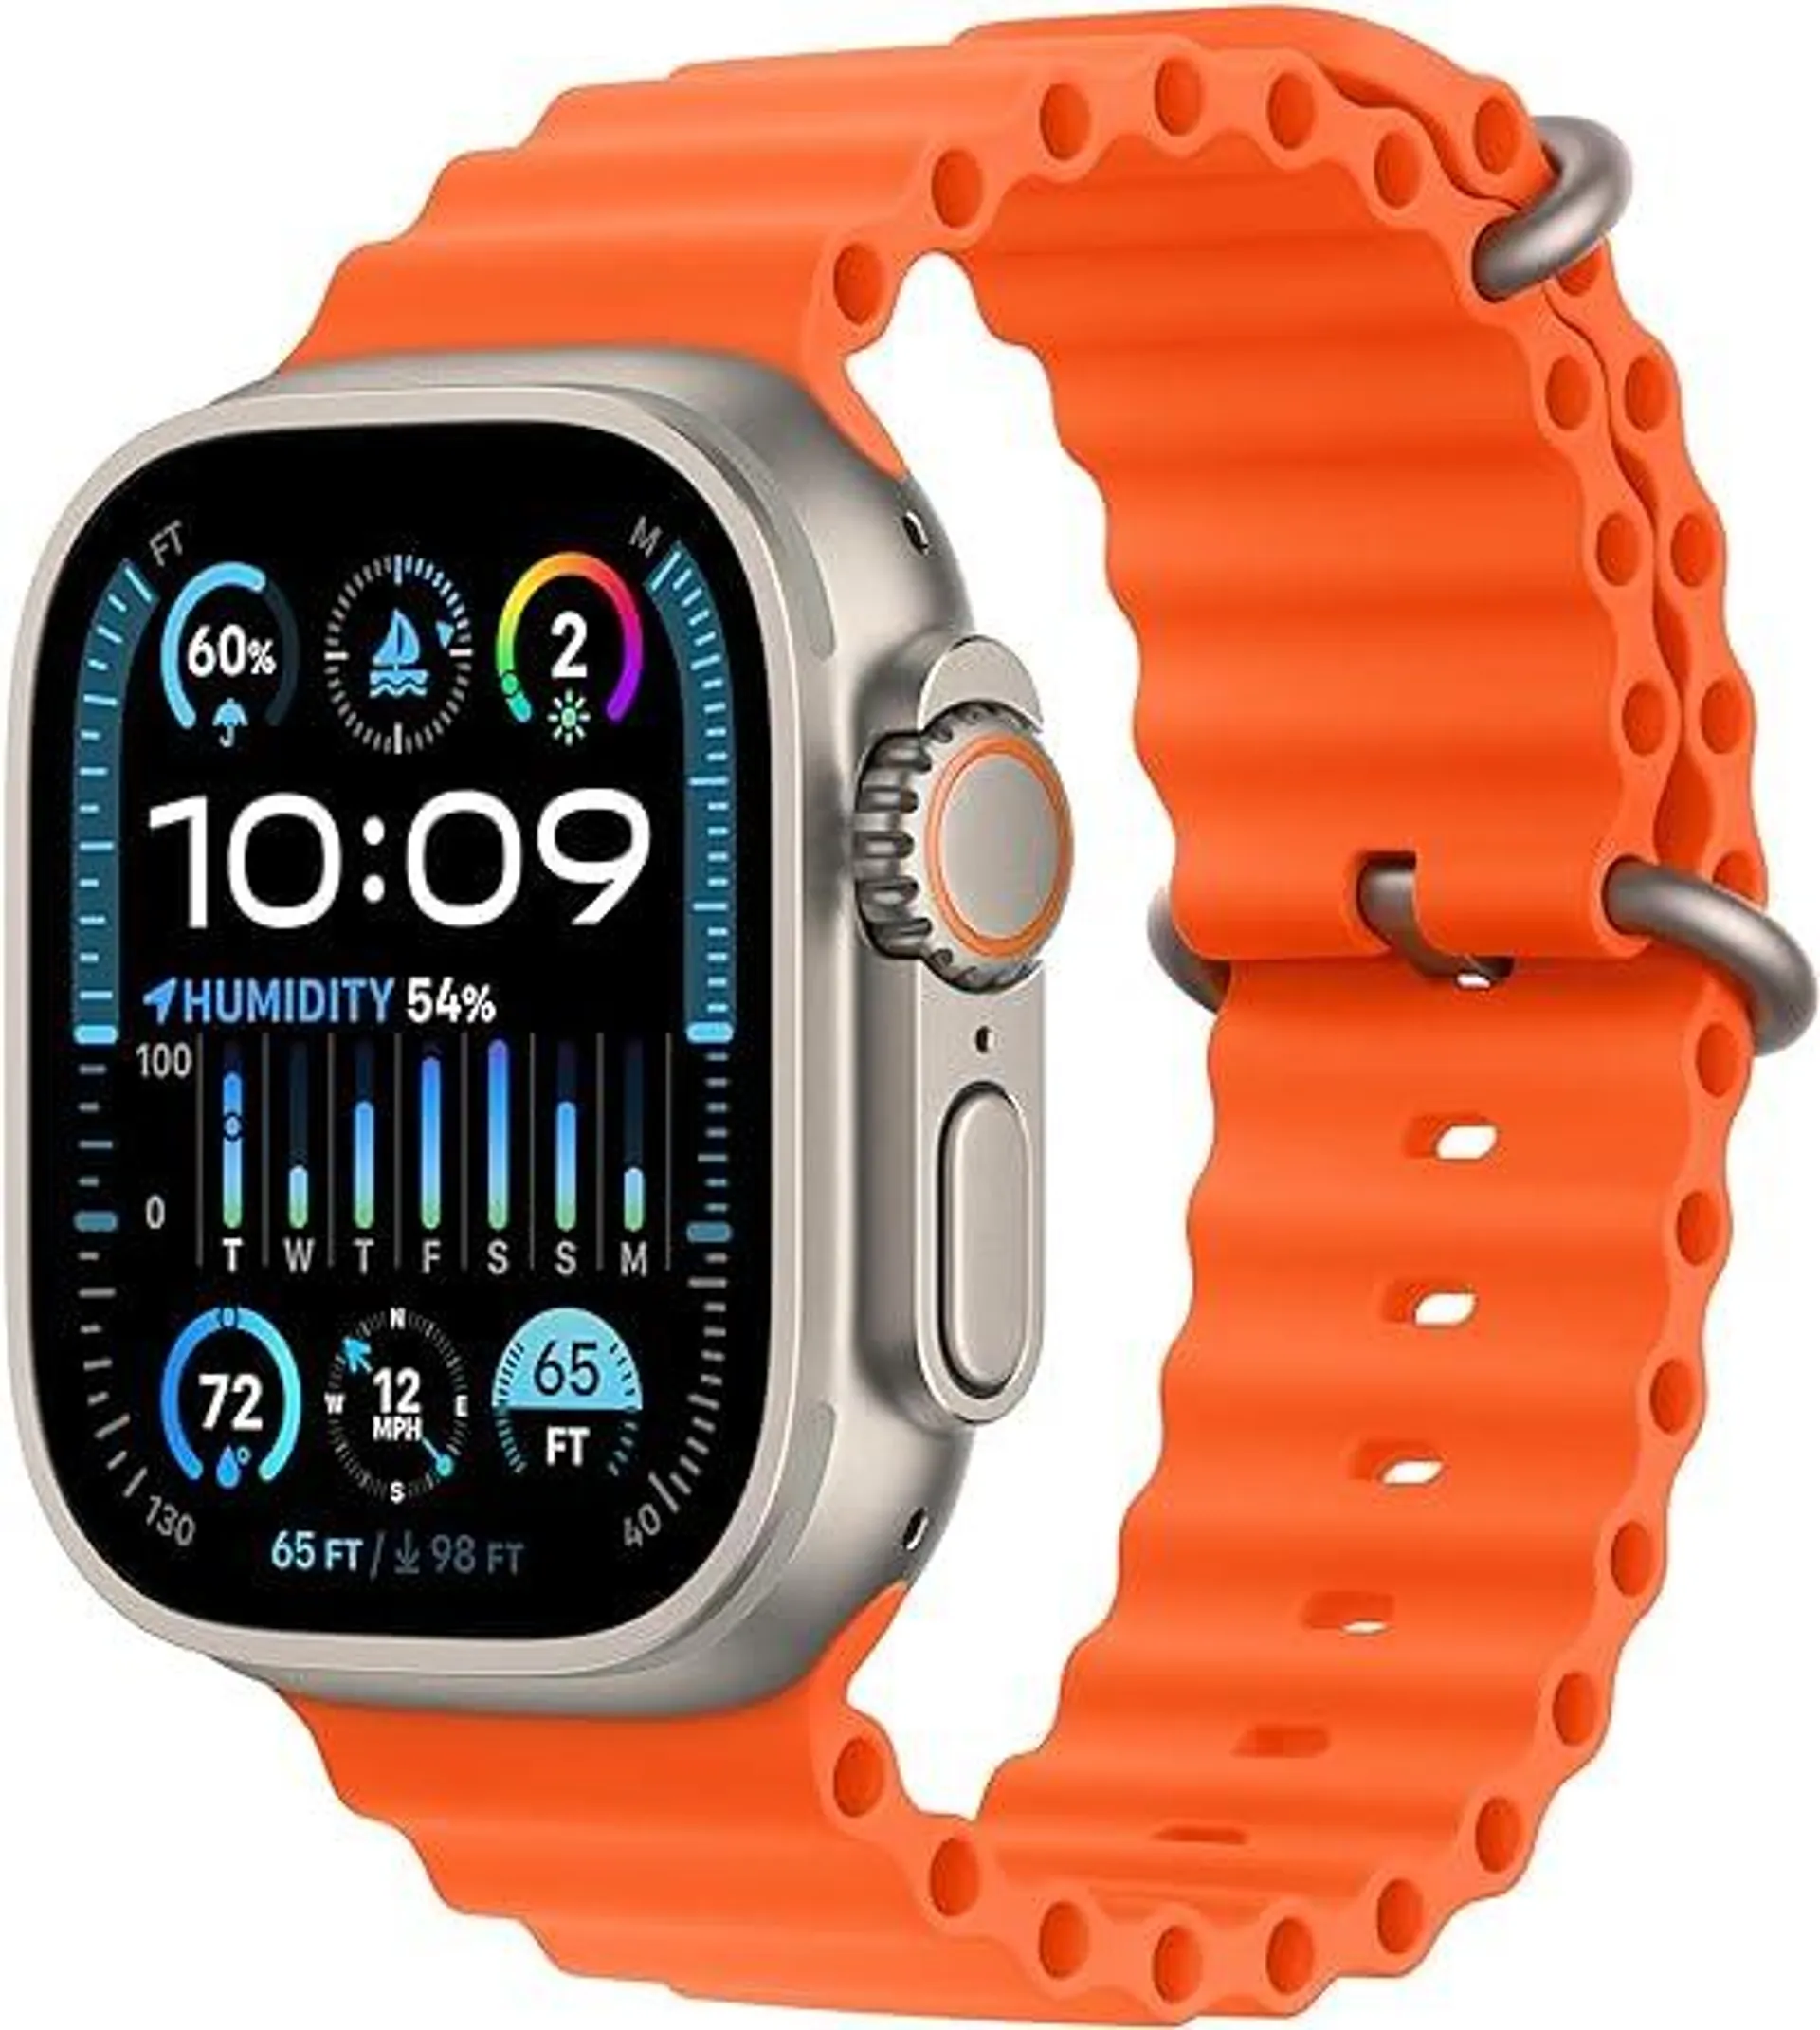 Apple Watch Ultra 2 [GPS + Cellular 49mm] Smartwatch with Rugged Titanium Case & Orange Ocean Band. Fitness Tracker, Precision GPS, Action Button, Extra-Long Battery Life, Bright Retina Display